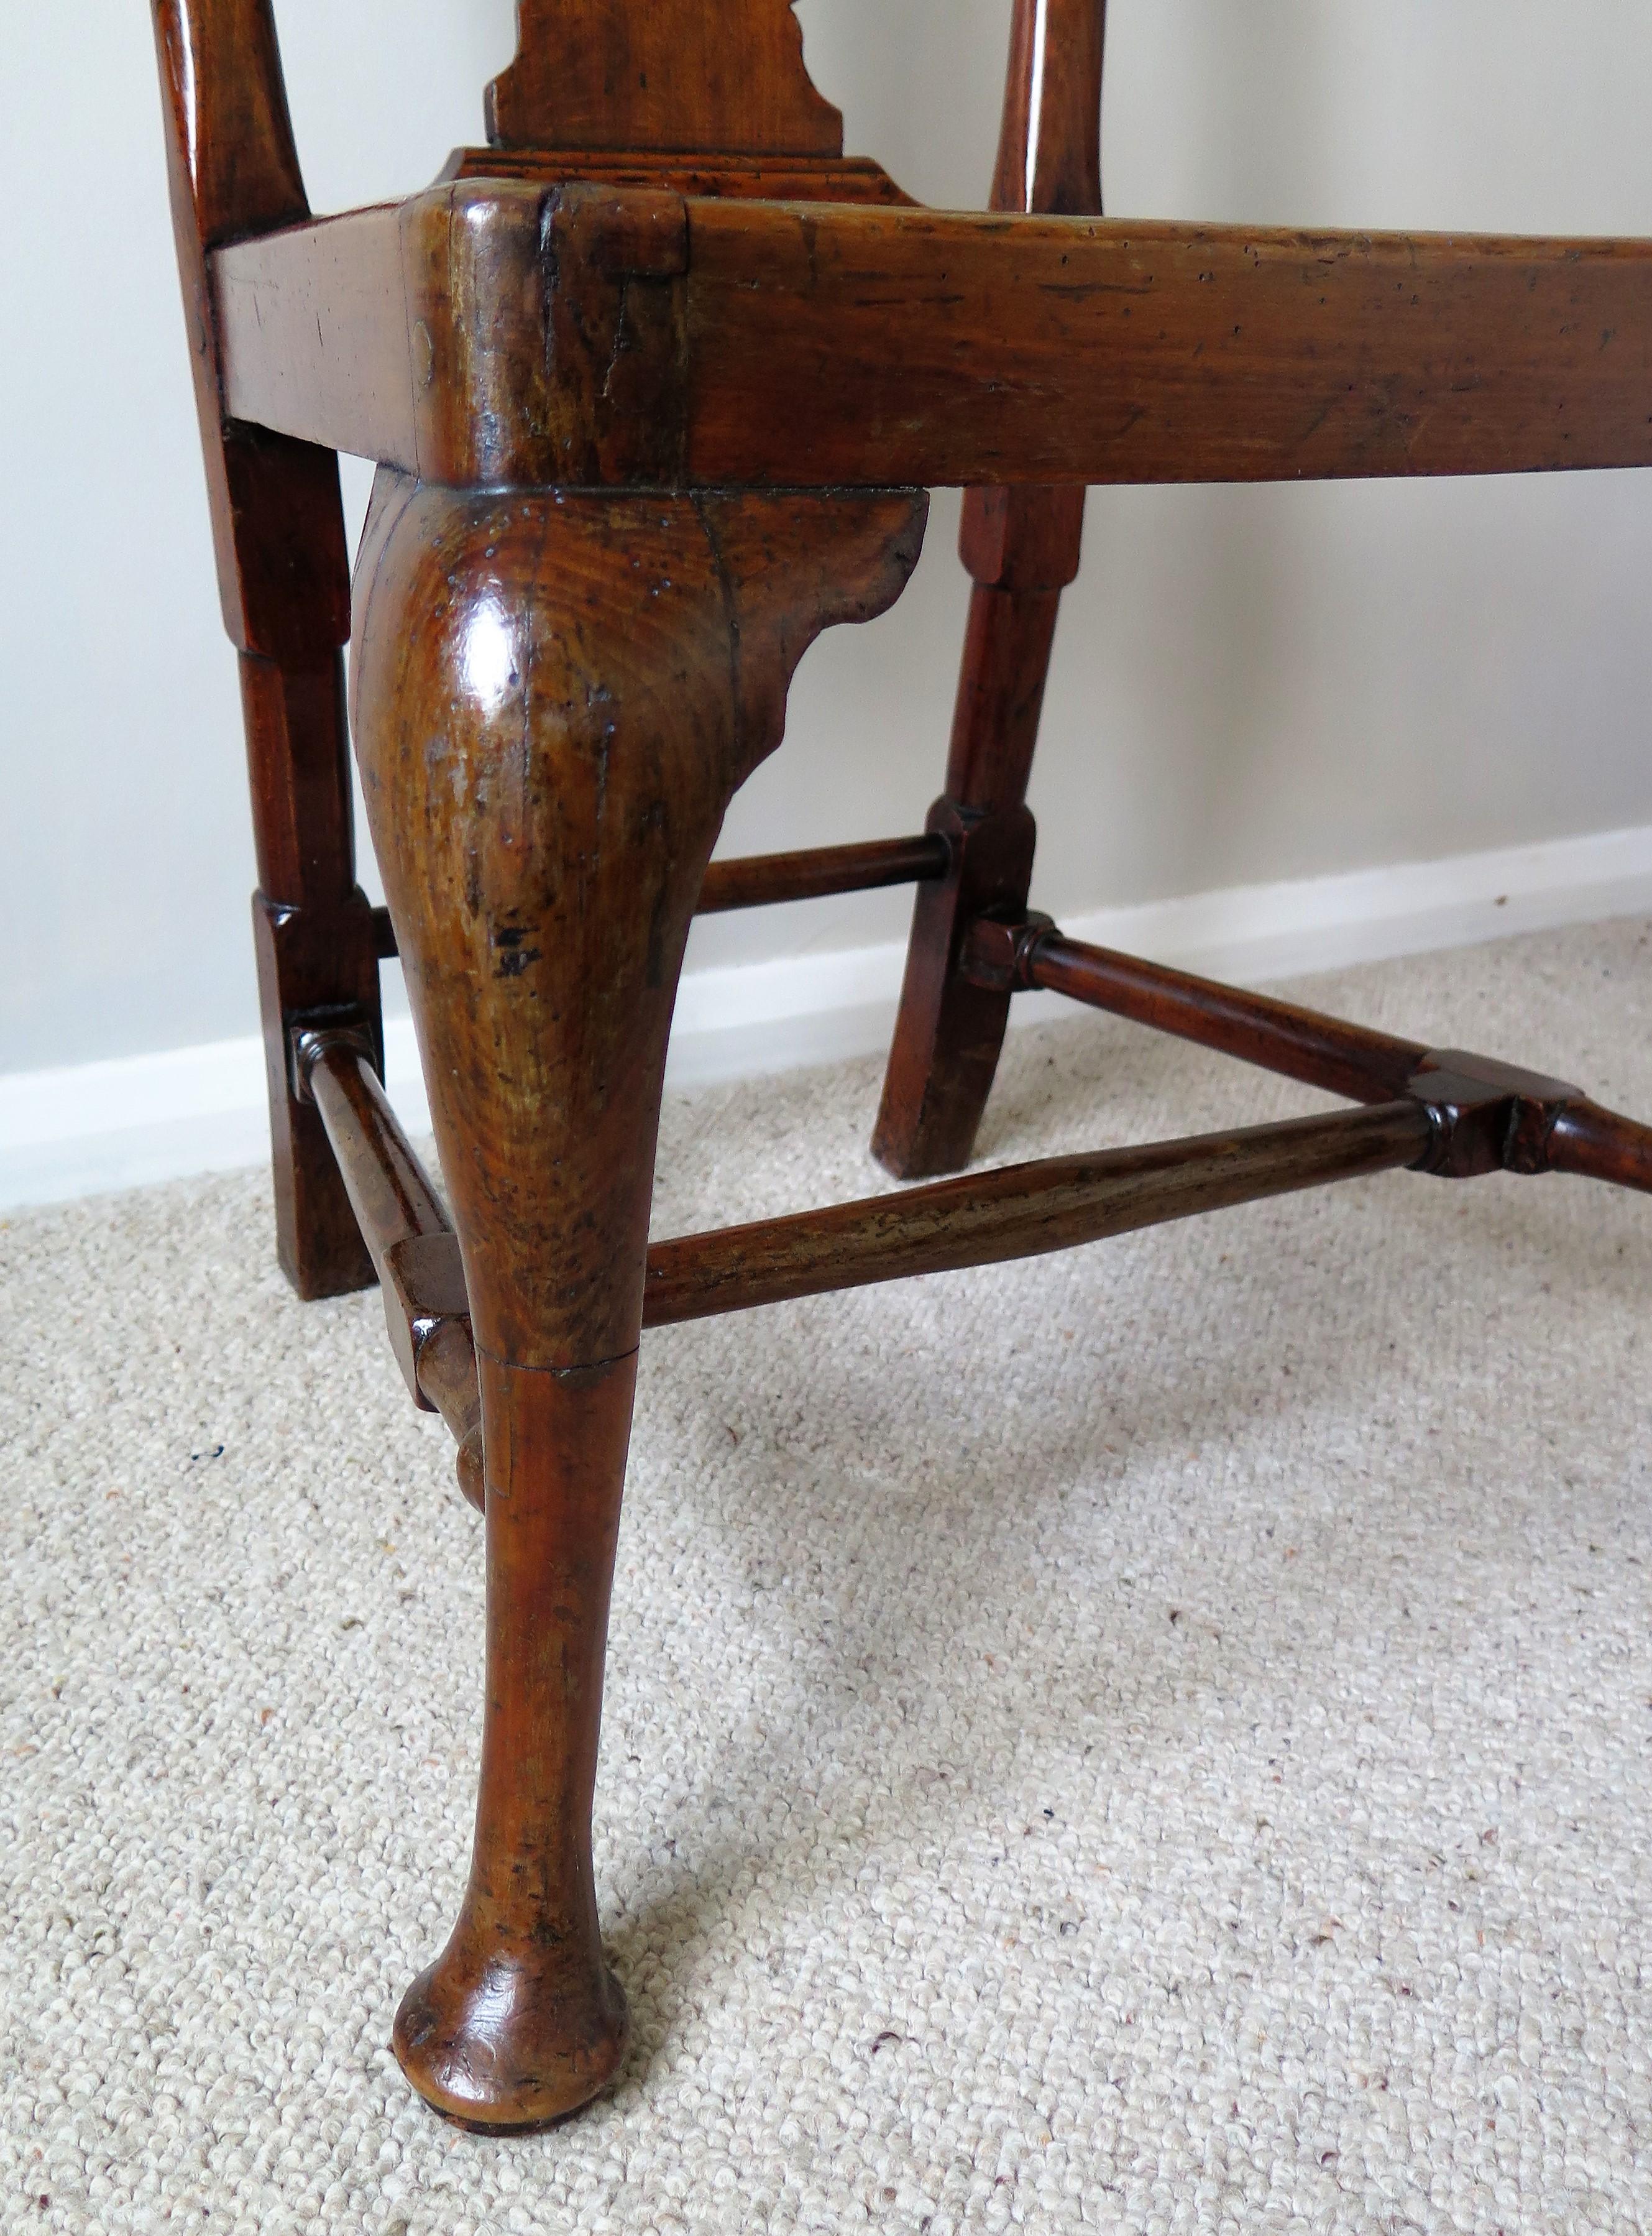 Queen Anne Period Walnut Chair Cabriole Legs and Stretchers, English circa 1700 For Sale 6